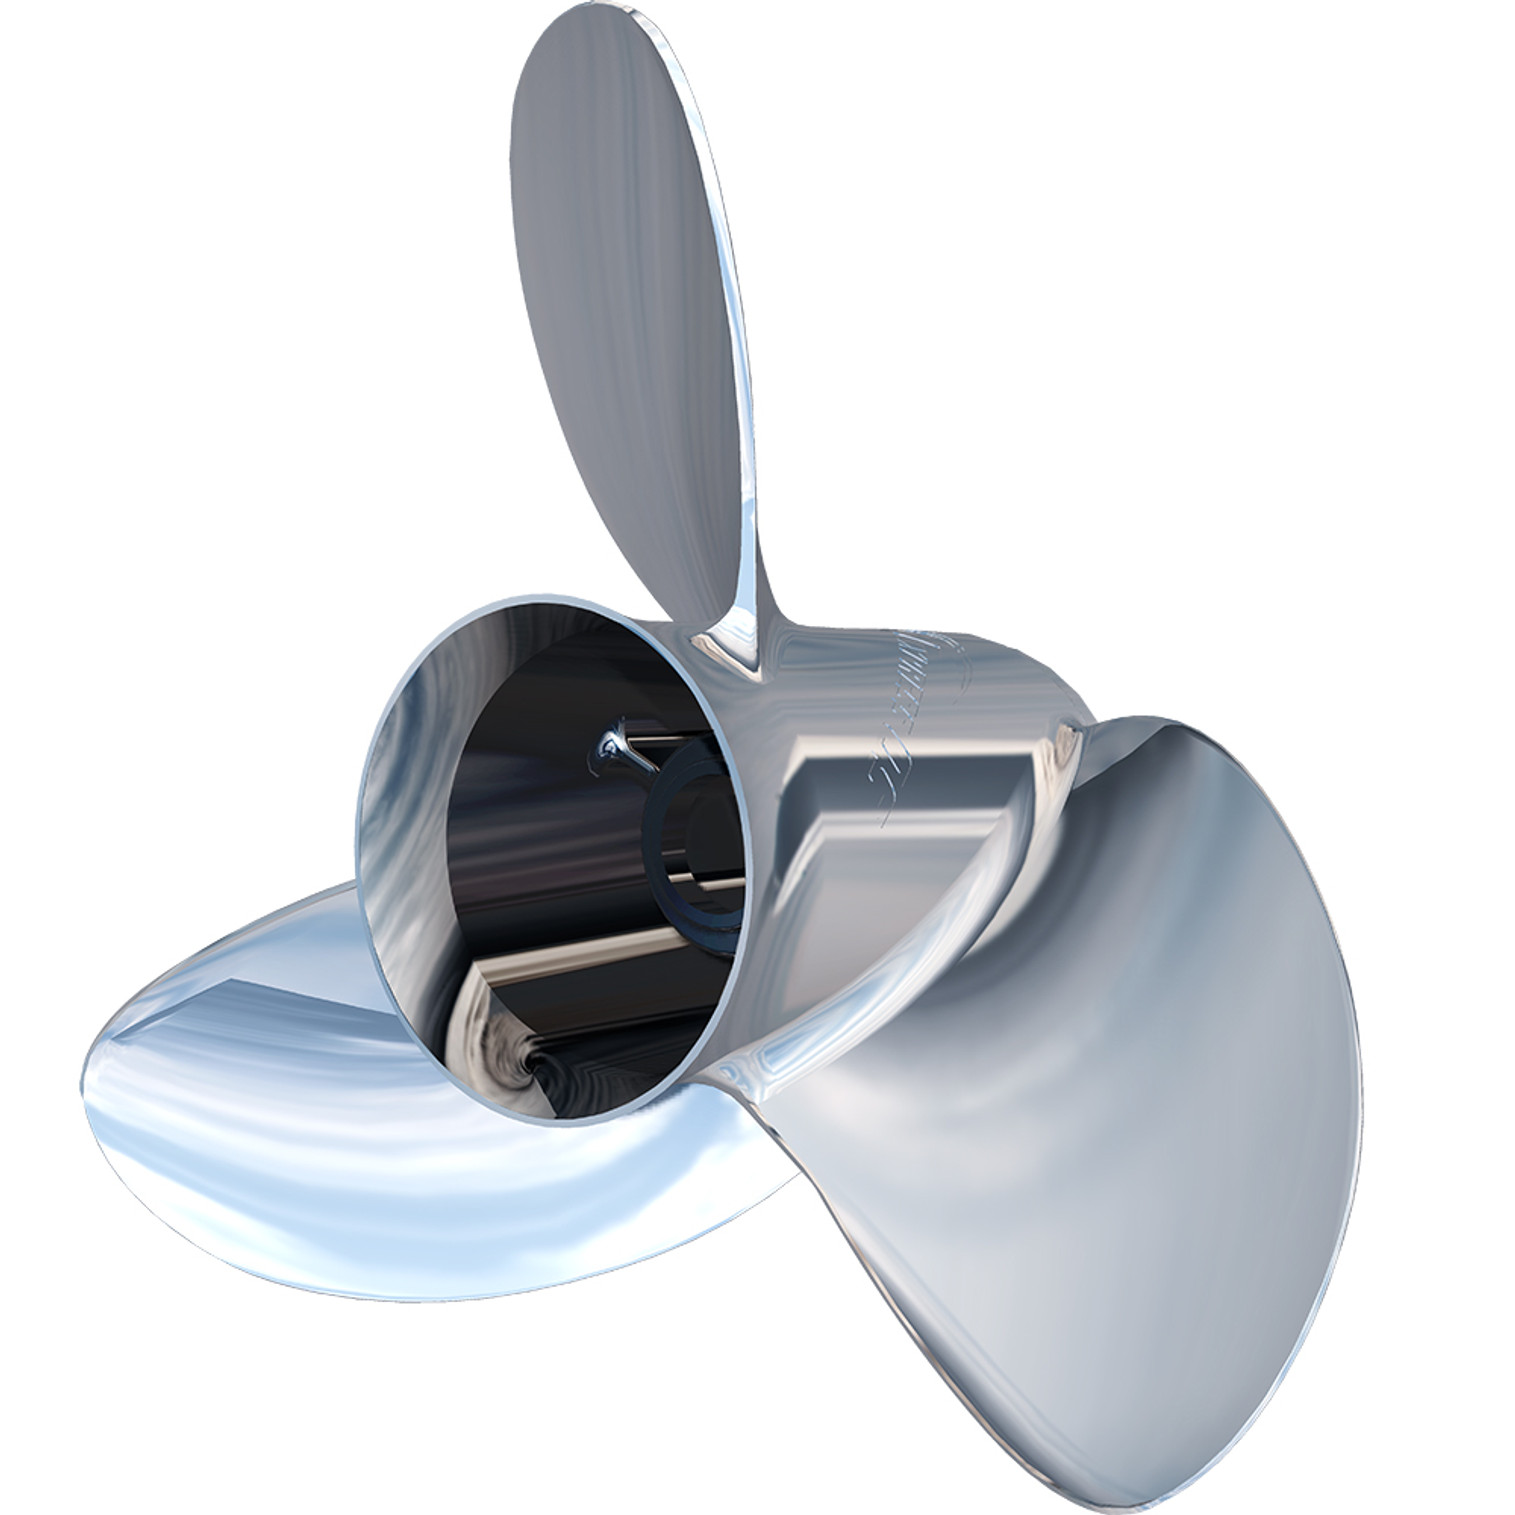 Turning Point Express Mach3 OS - Left Hand - Stainless Steel Propeller - OS-1615-L - 3-Blade - 15.625" x 15 Pitch